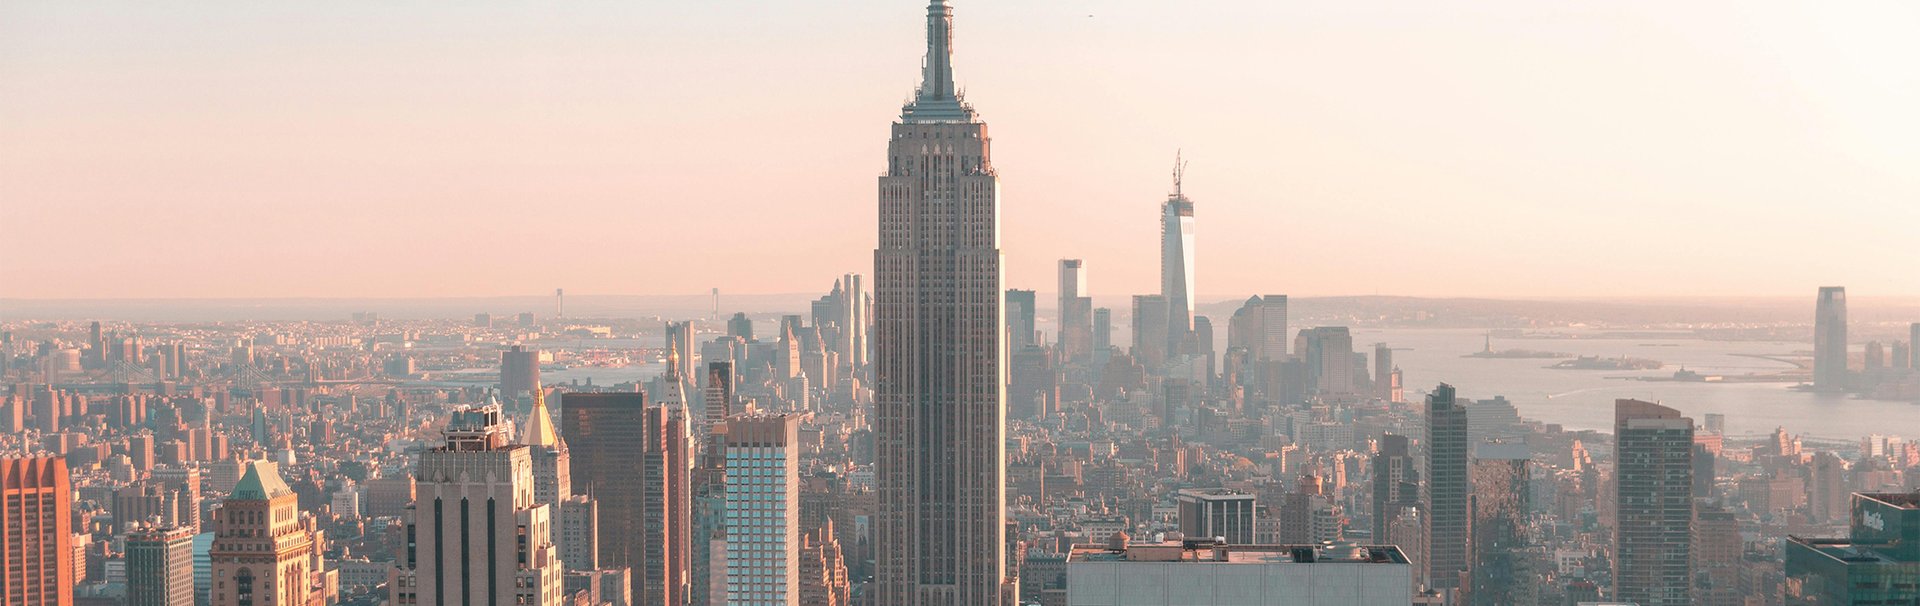 NYC Empire State 2120x670